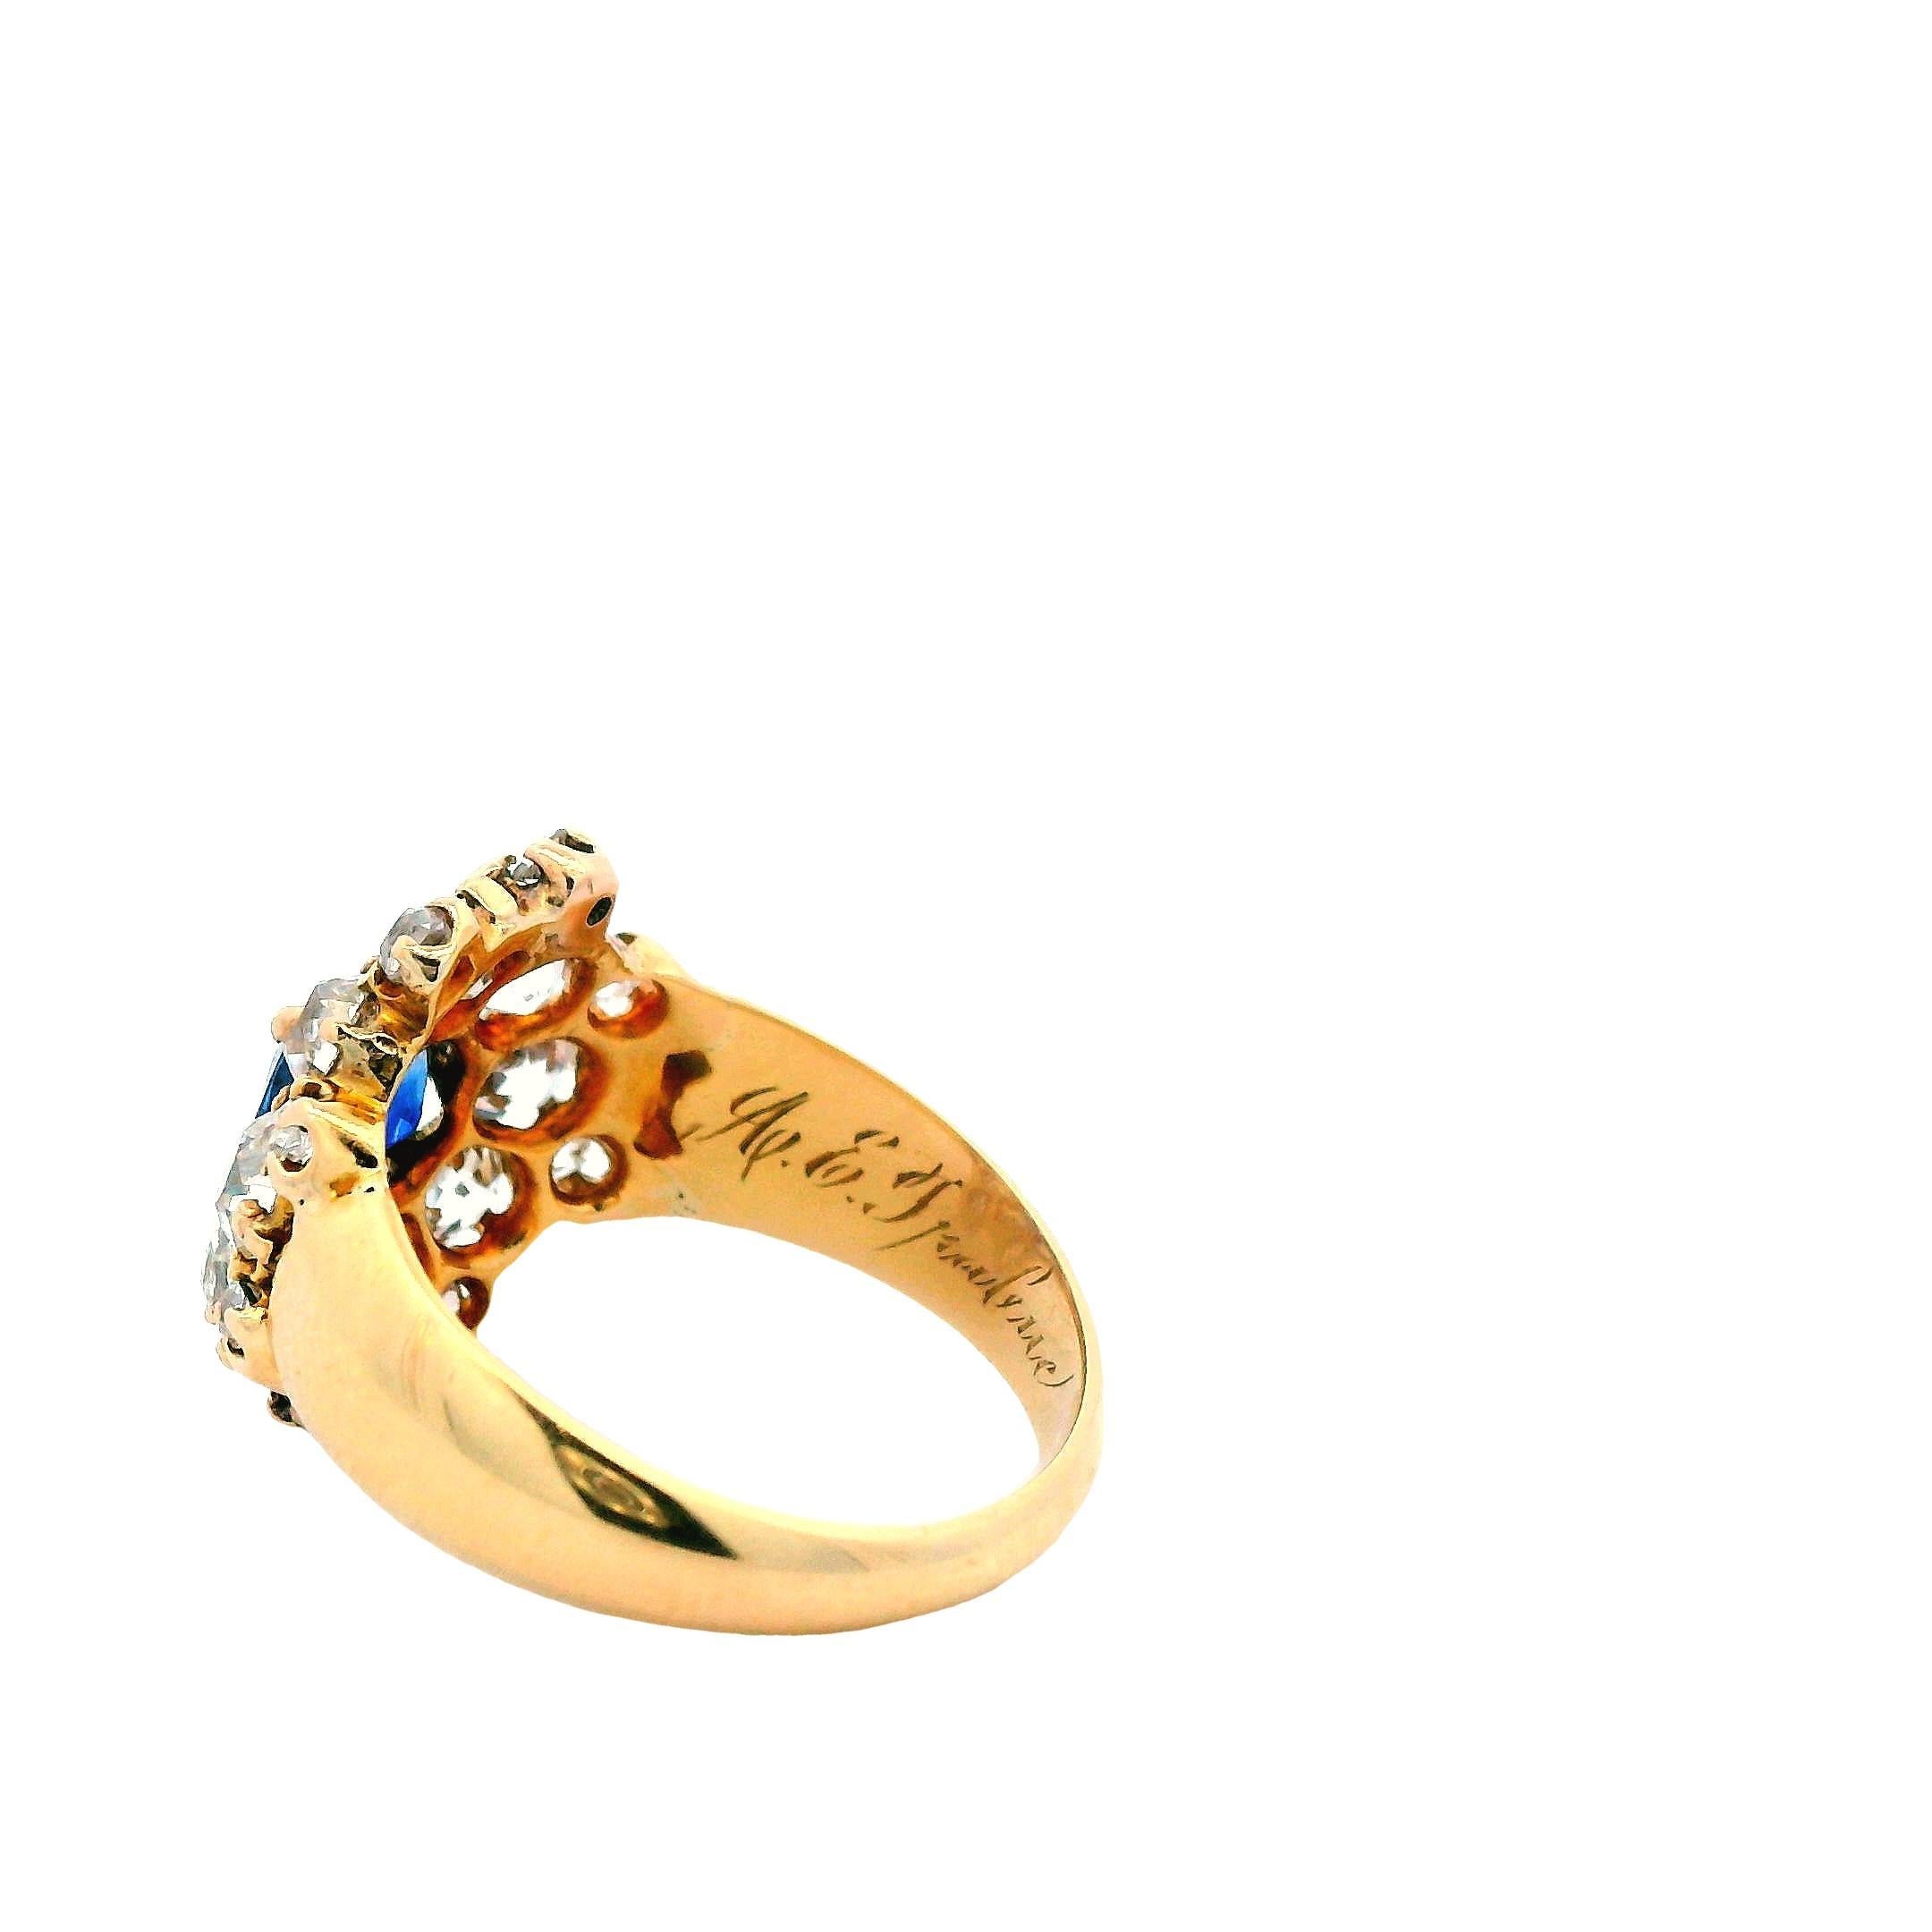 1890 Victorian 18K Yellow Gold Sapphire and Diamond Ring For Sale 3